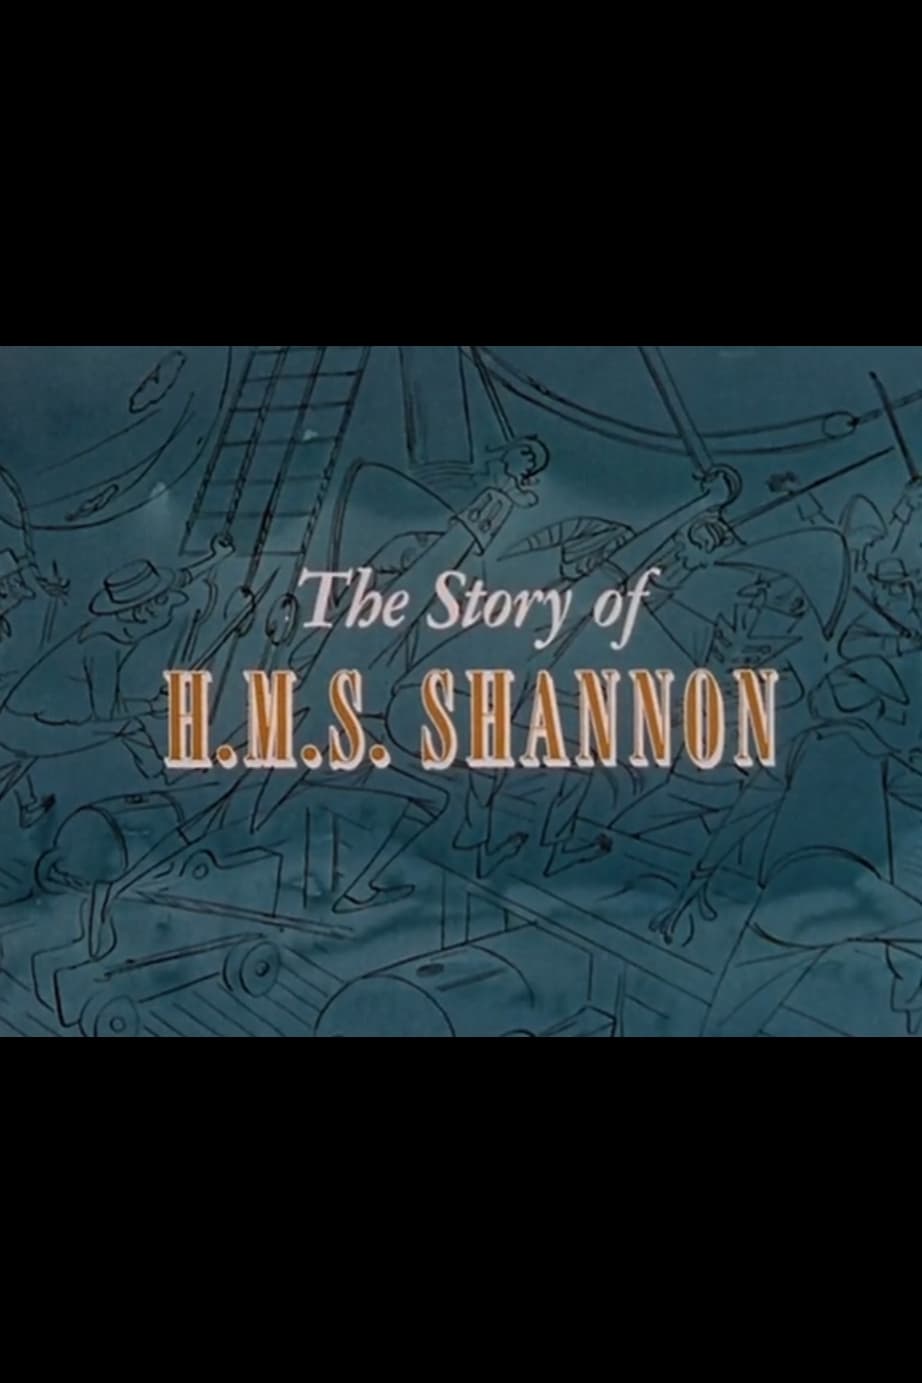 The Story of H.M.S. Shannon